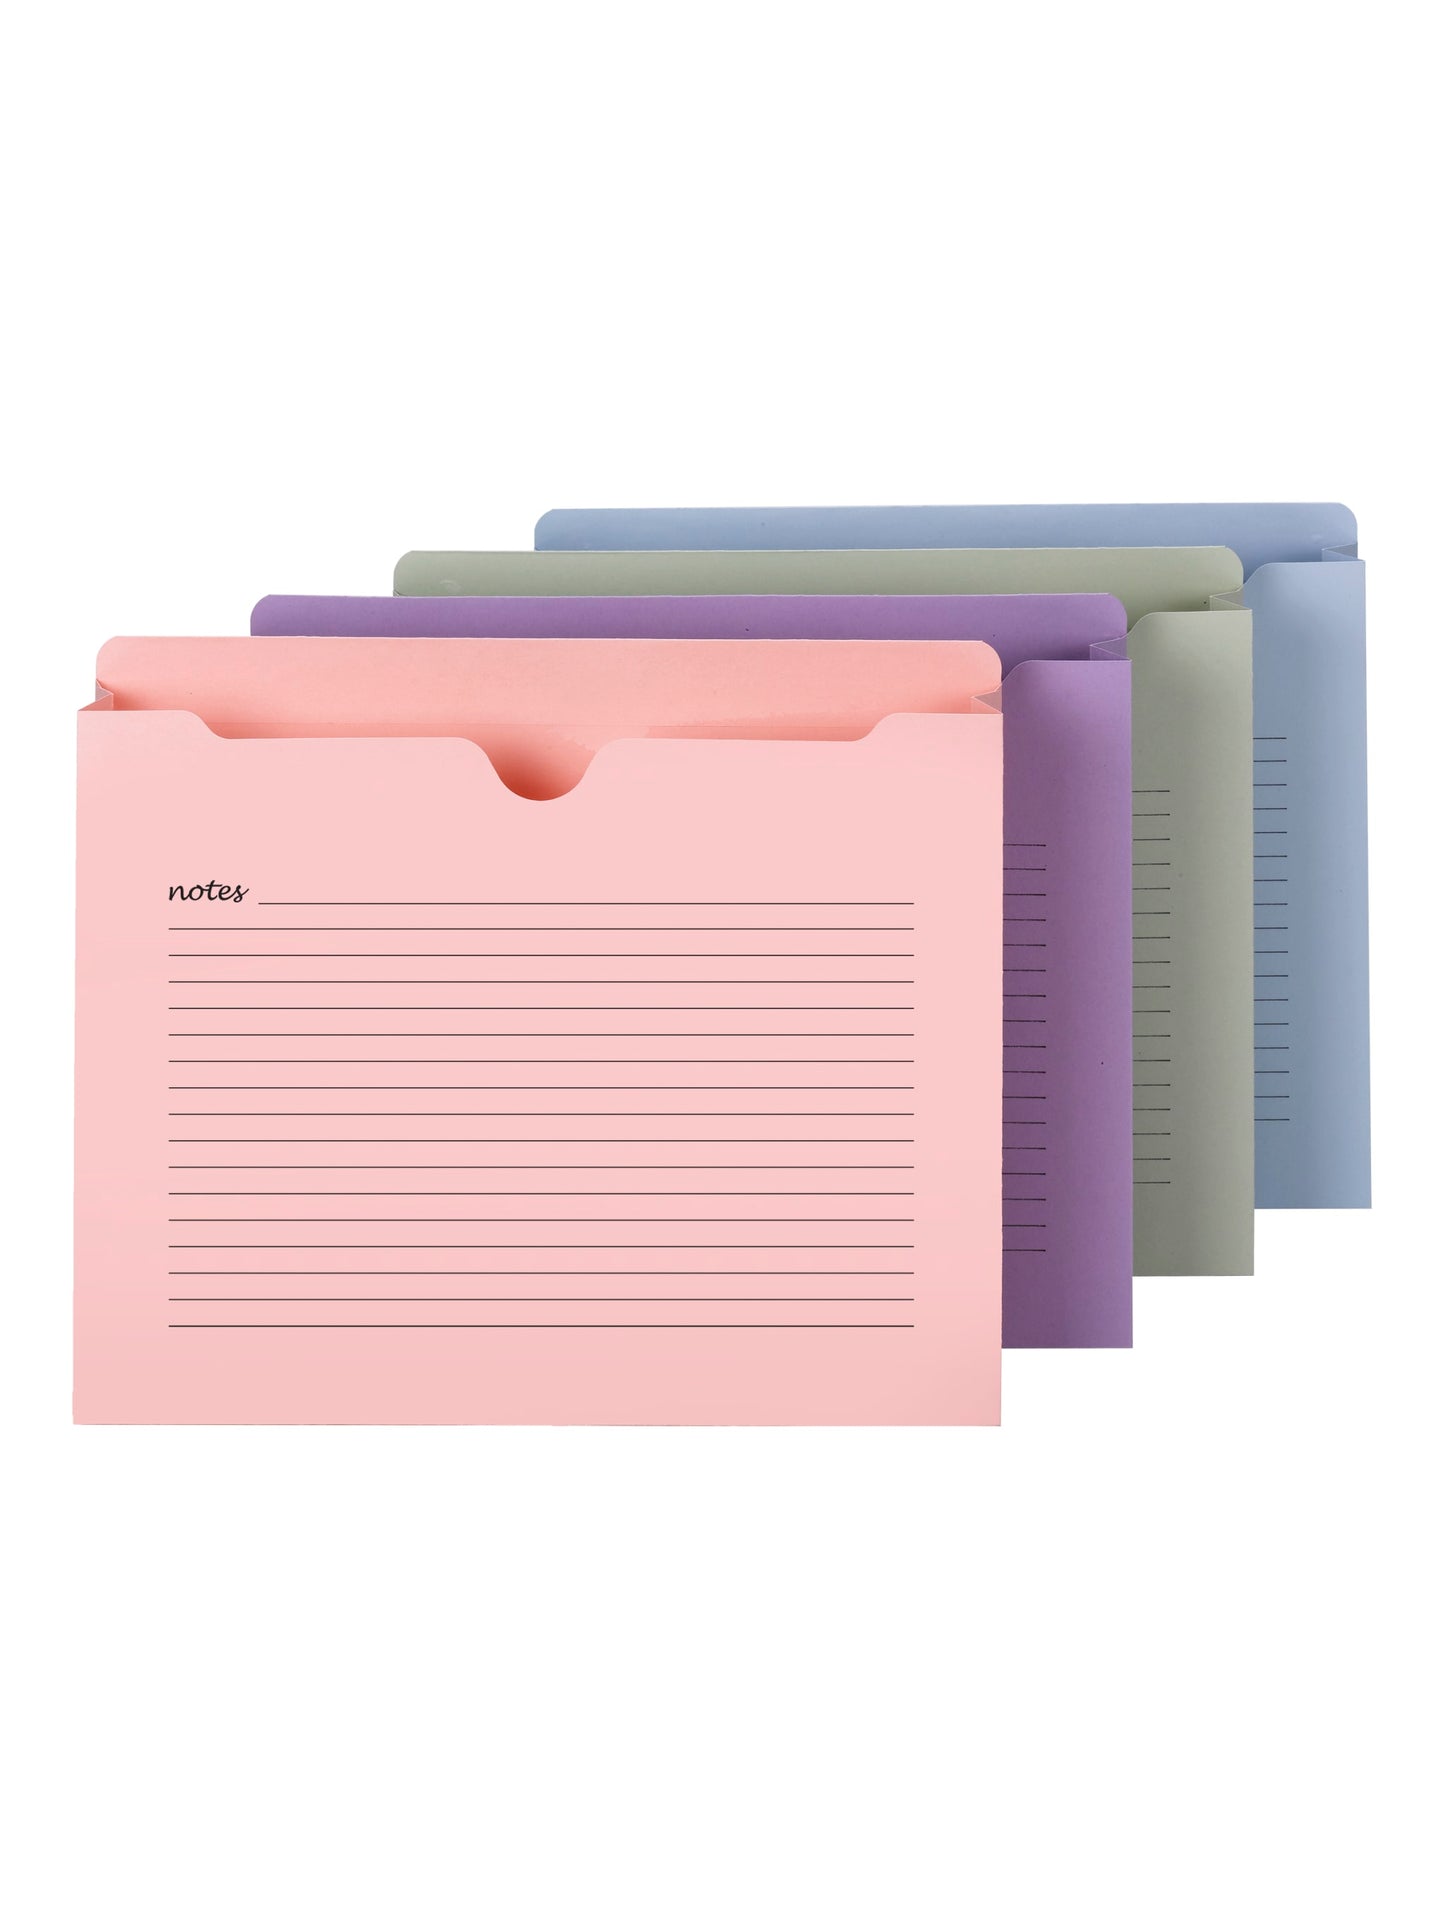 Notes File Jackets, Straight-Cut Tab, 2 Inch Expansion, Assorted Pastels Color, Letter Size, Set of 1, 086486756952